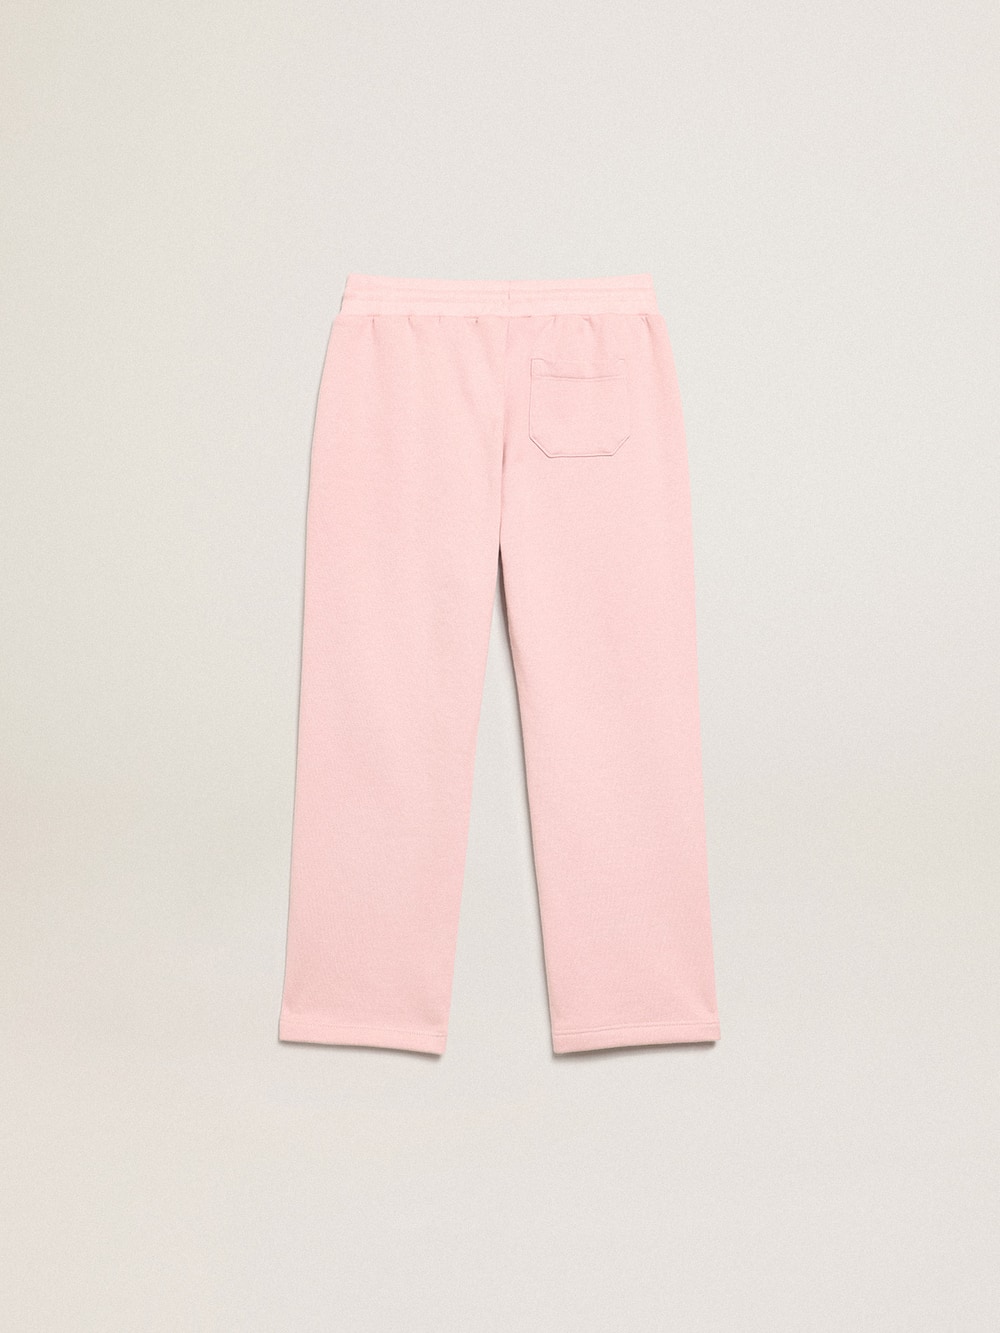 Golden Goose - Pink joggers with glitter star on the front in 